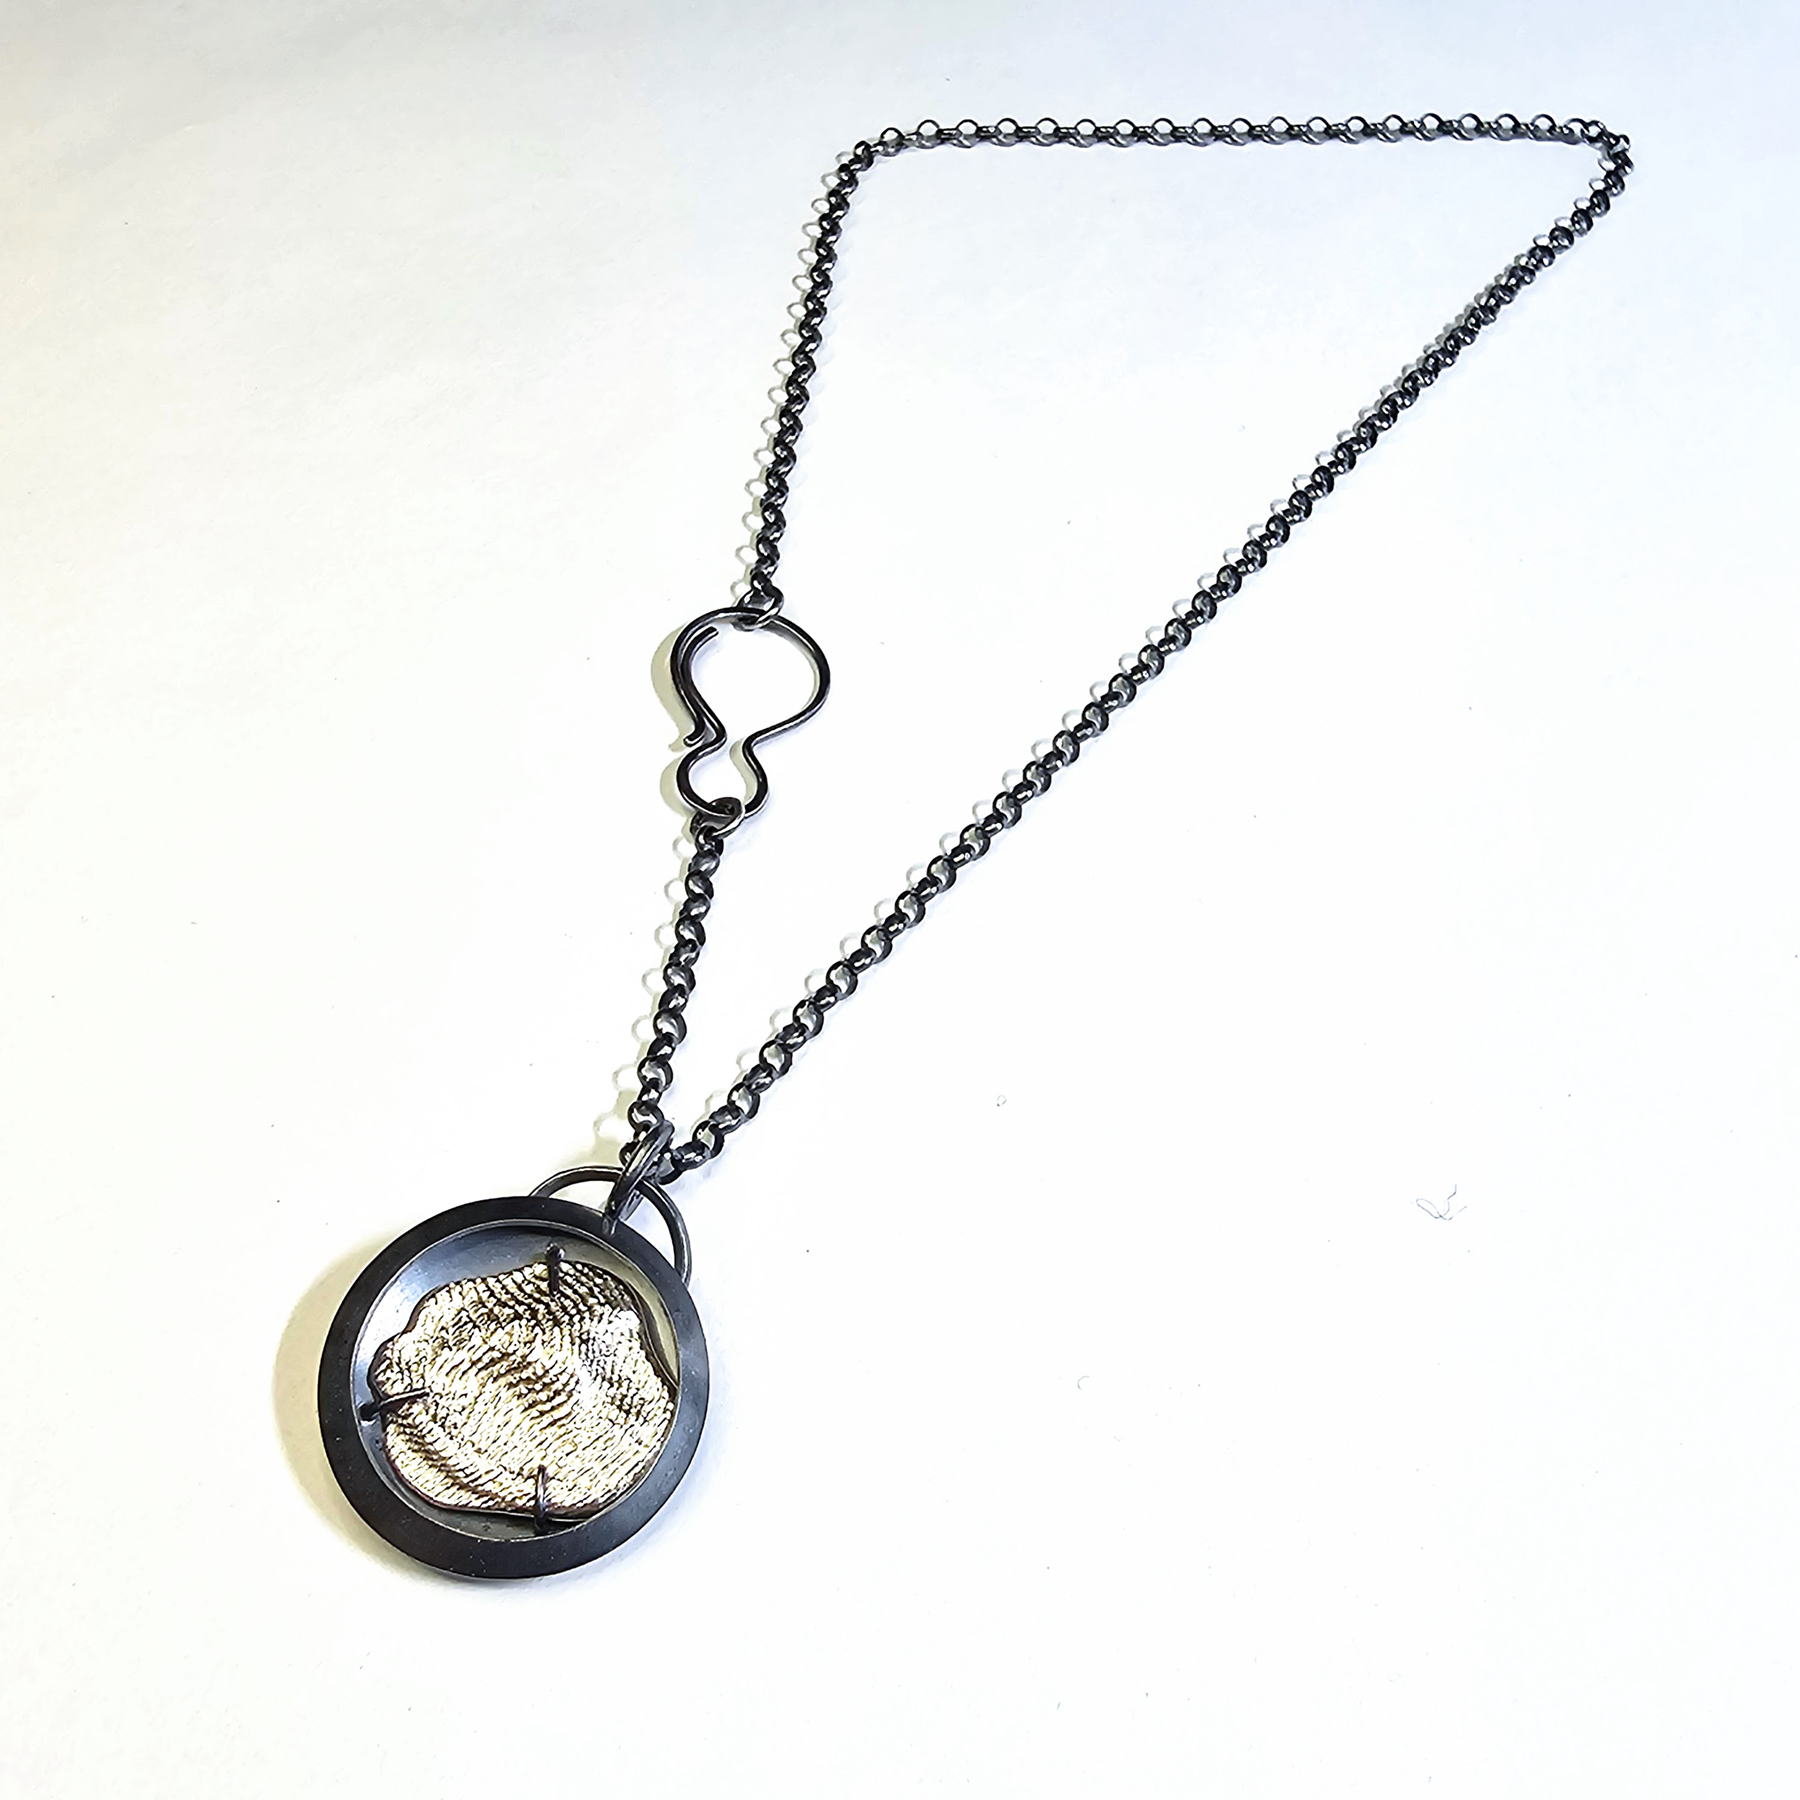 Silver topography pendant, image courtesy of Christen Booth